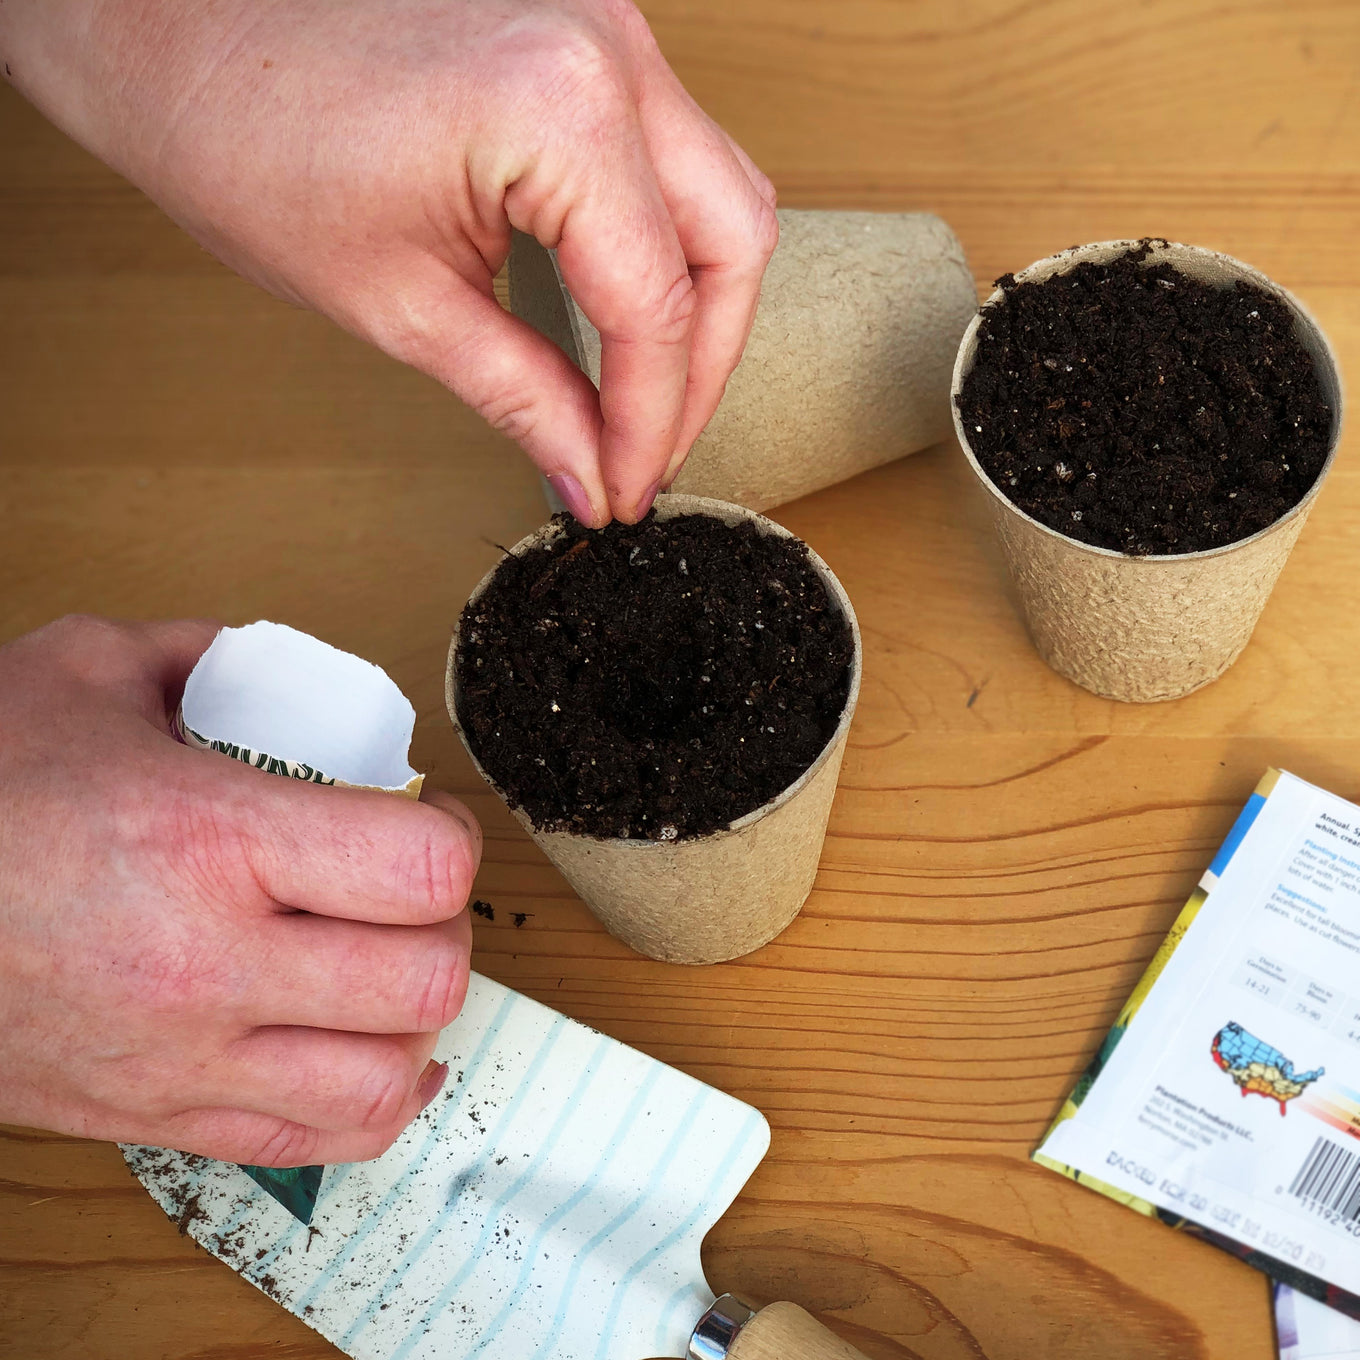 Start your Poinsett 76 Cucumber seeds in biodegradable peat or paper pots.